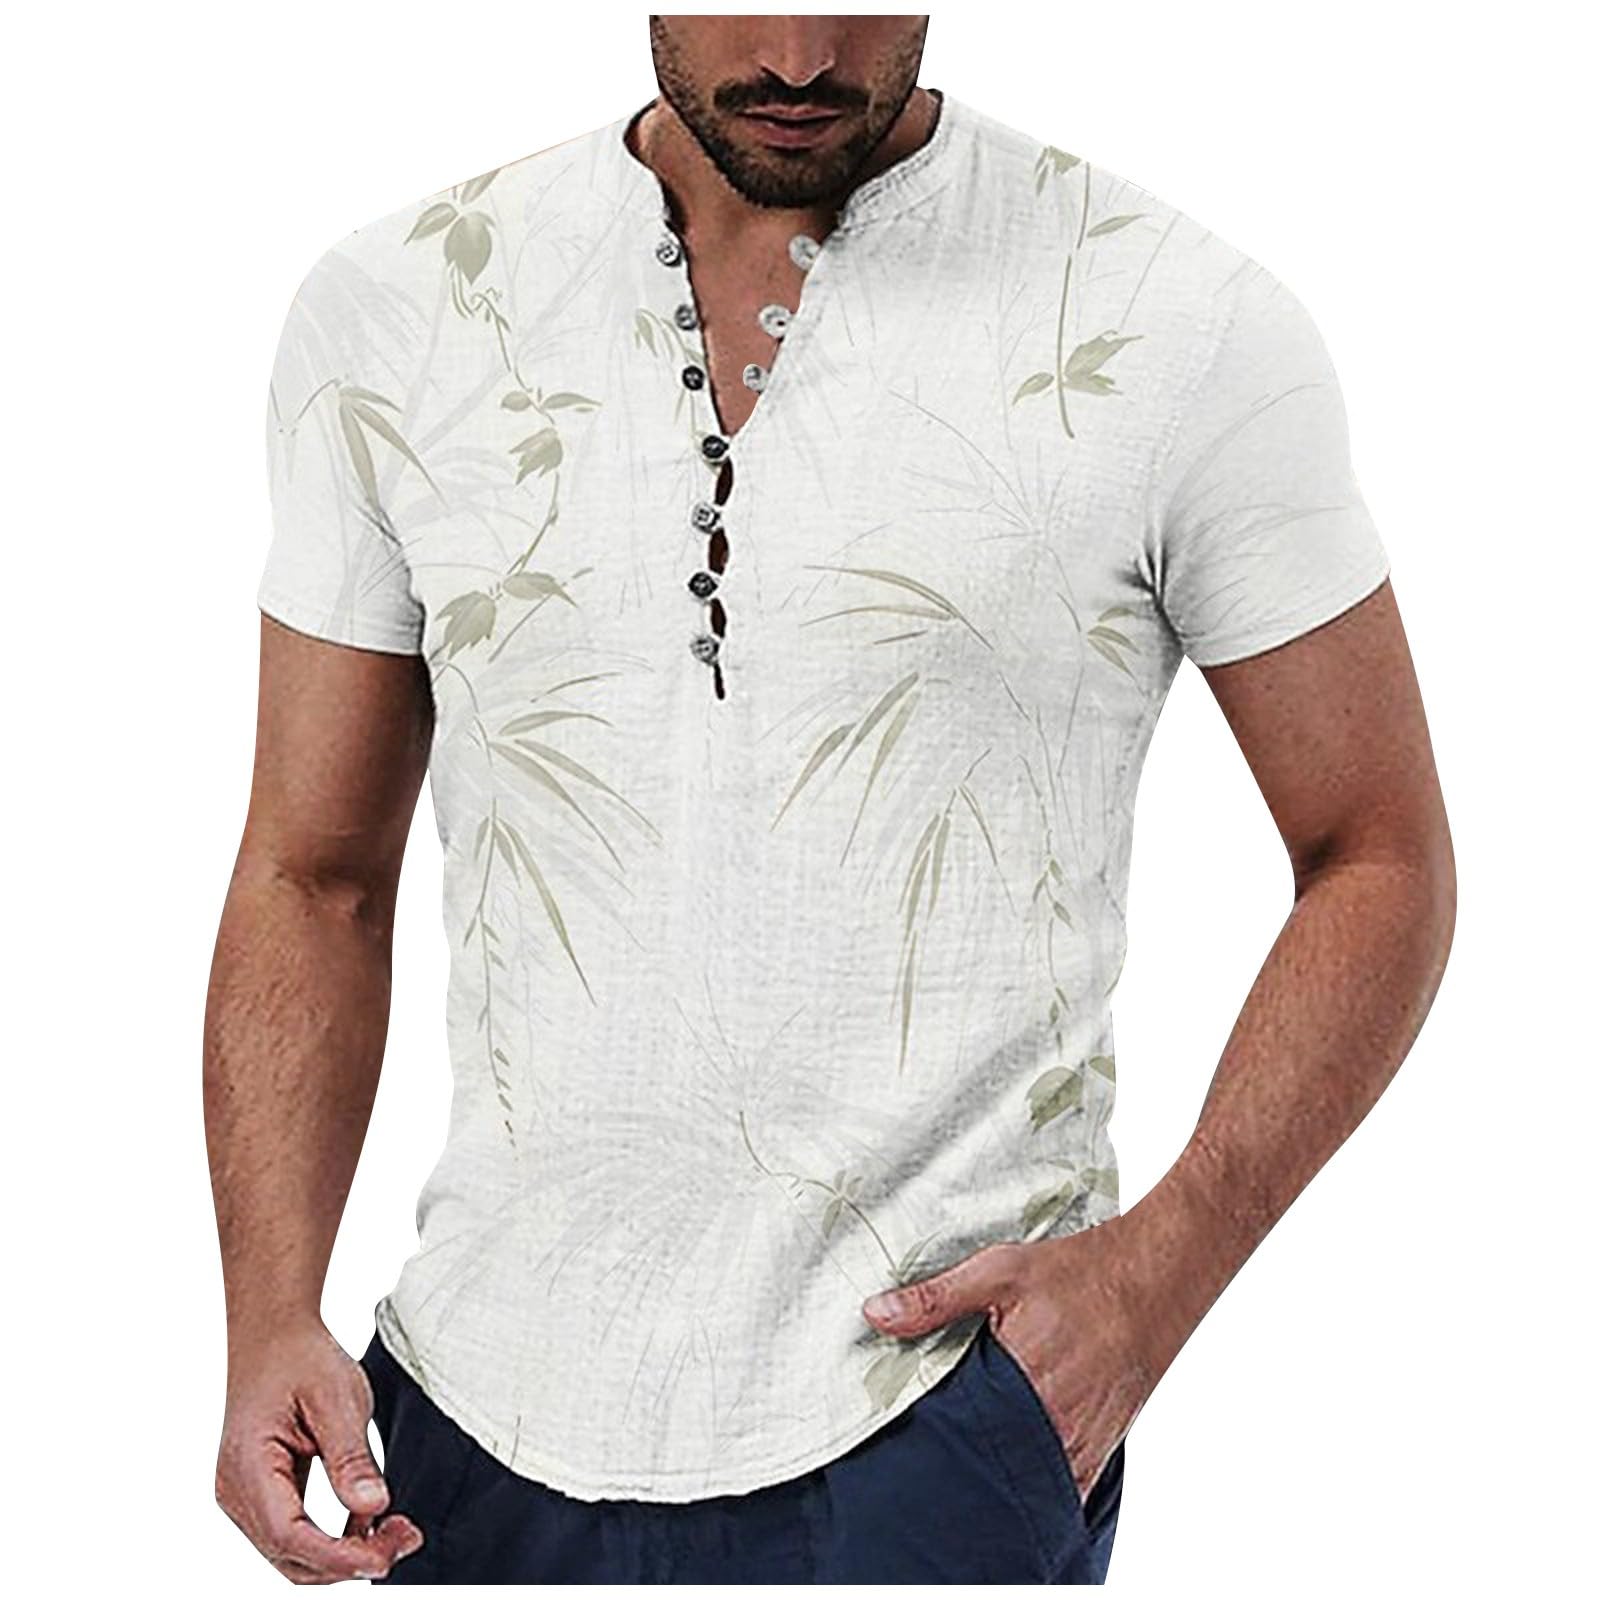 Buy White T Shirts for Men T Shirts for Men Workout Shirts for Men Short  Sleeve Casual Fashion T Shirt Lightweight Retro Print Shirt Button Down  Breathable Tops White XX-Large